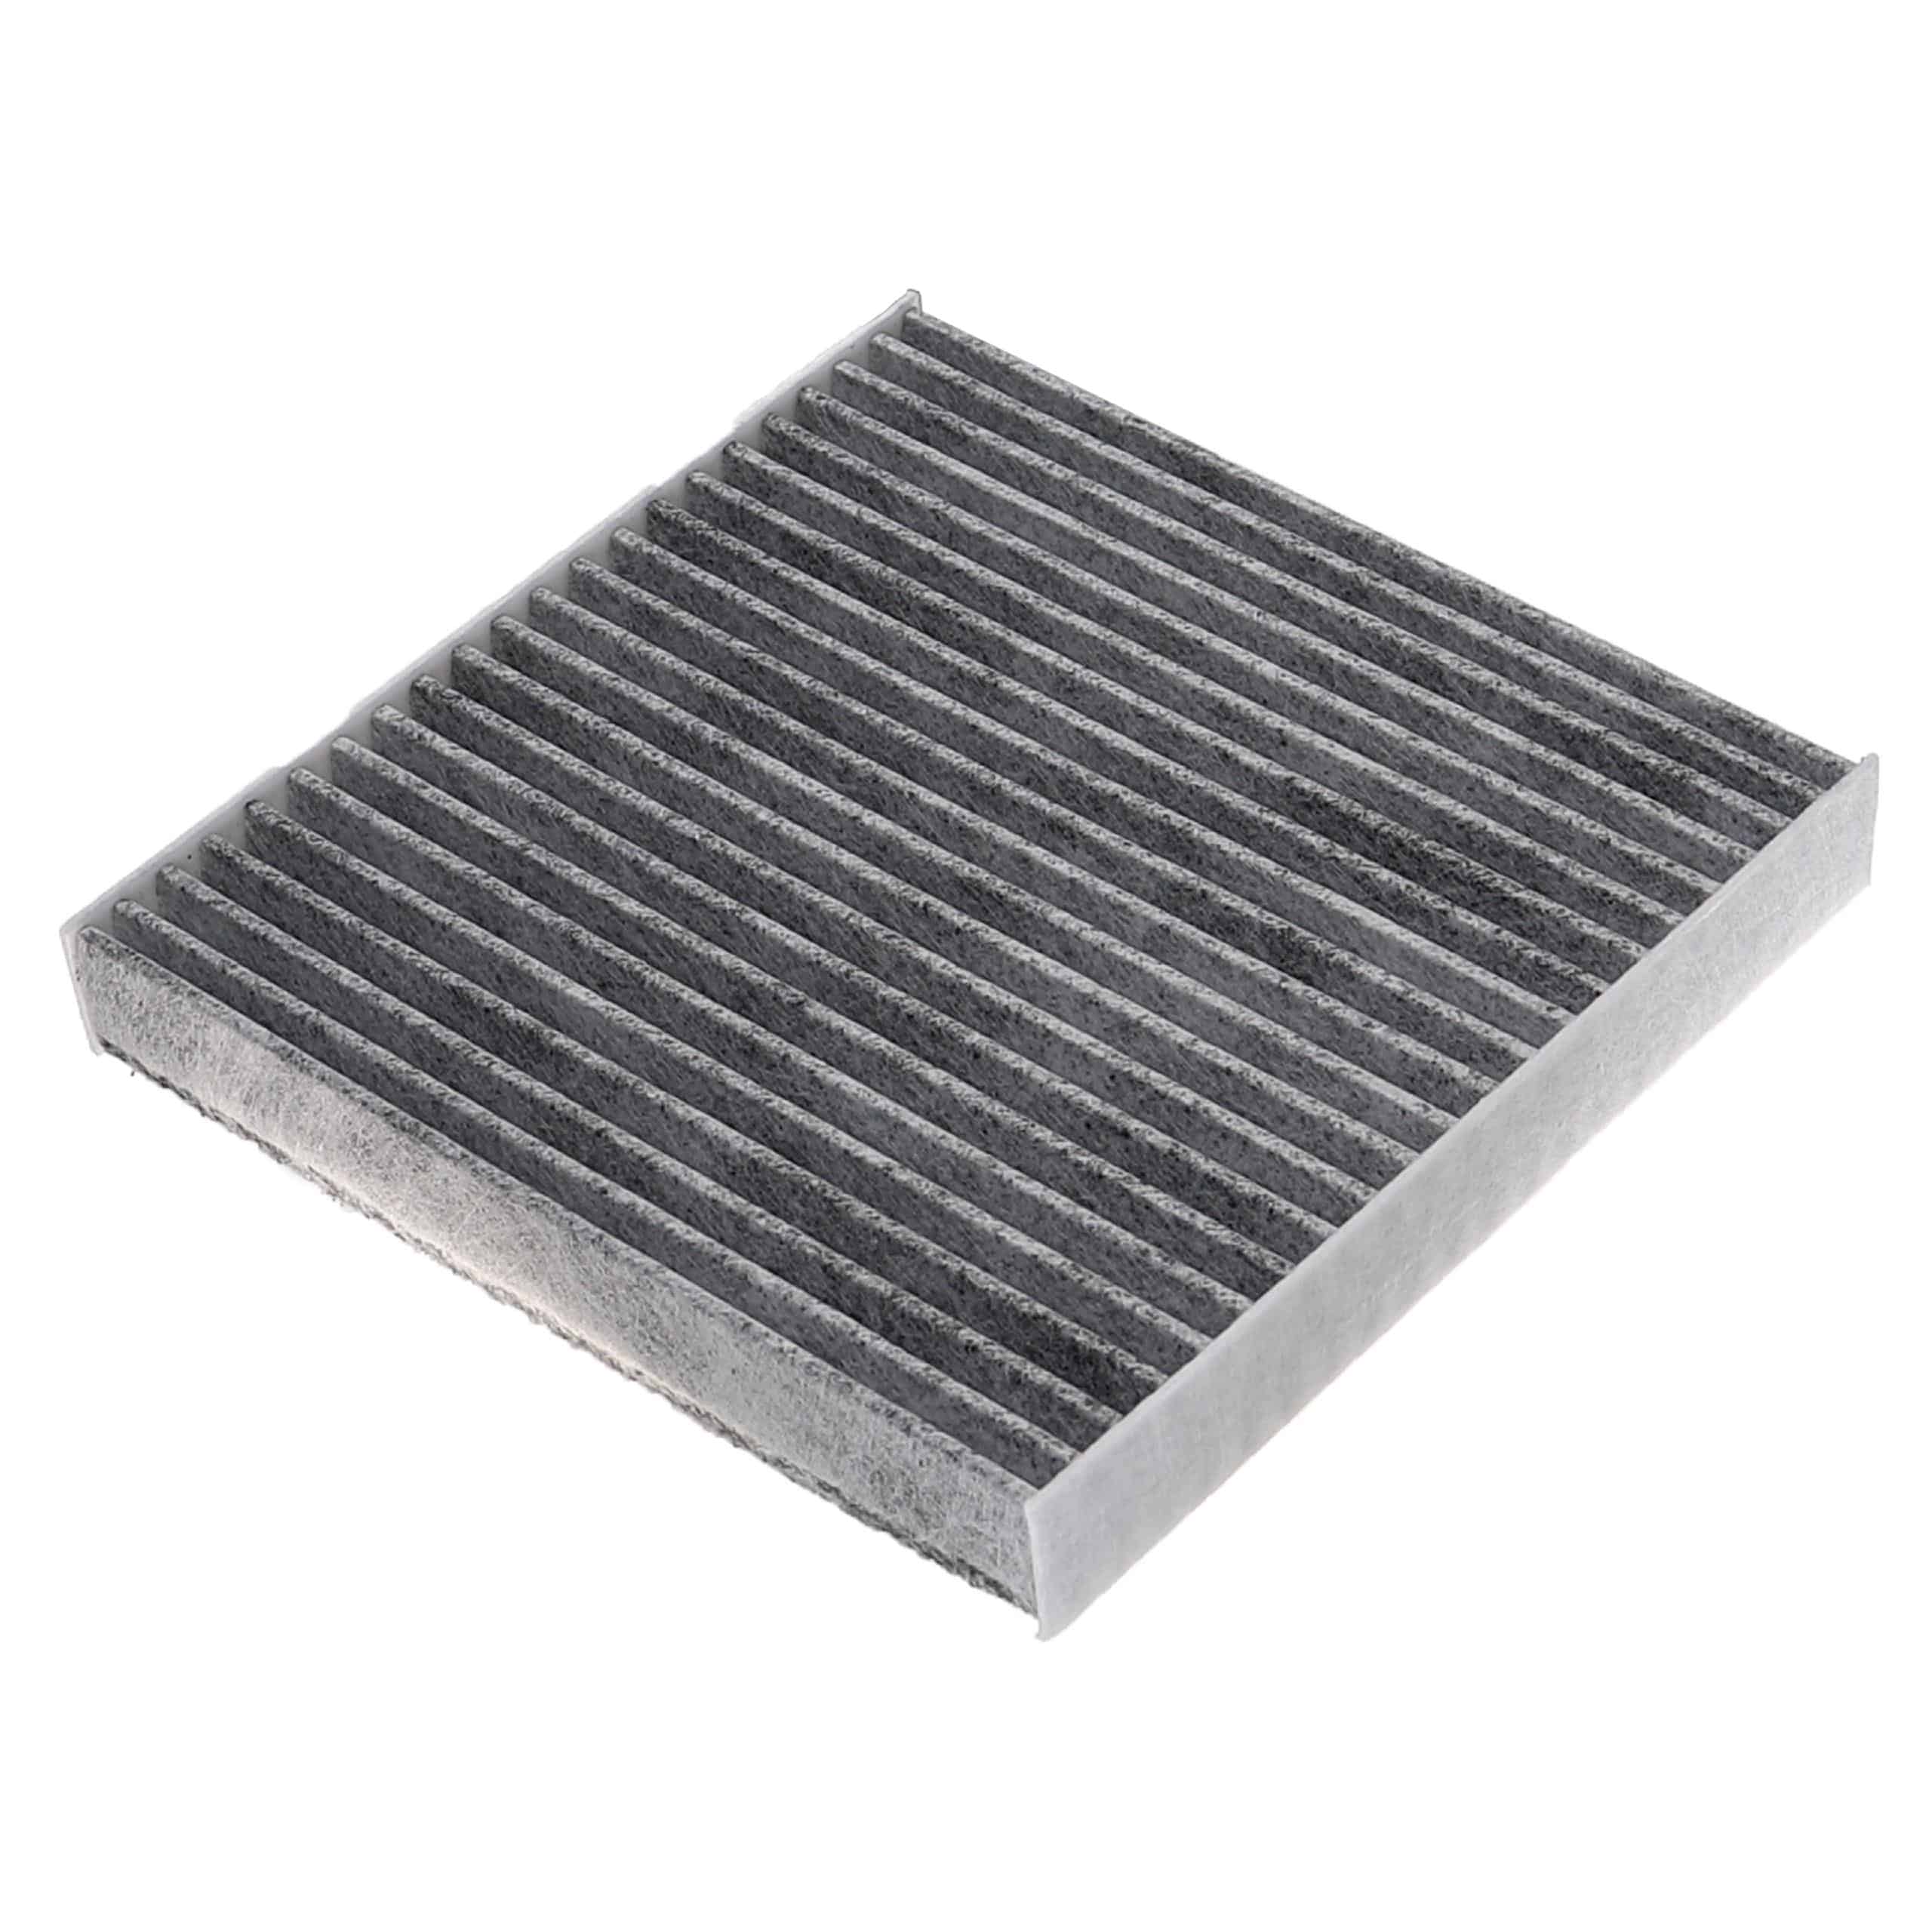 2x Cabin Air Filter replaces Alco Filter MS-6433C etc.